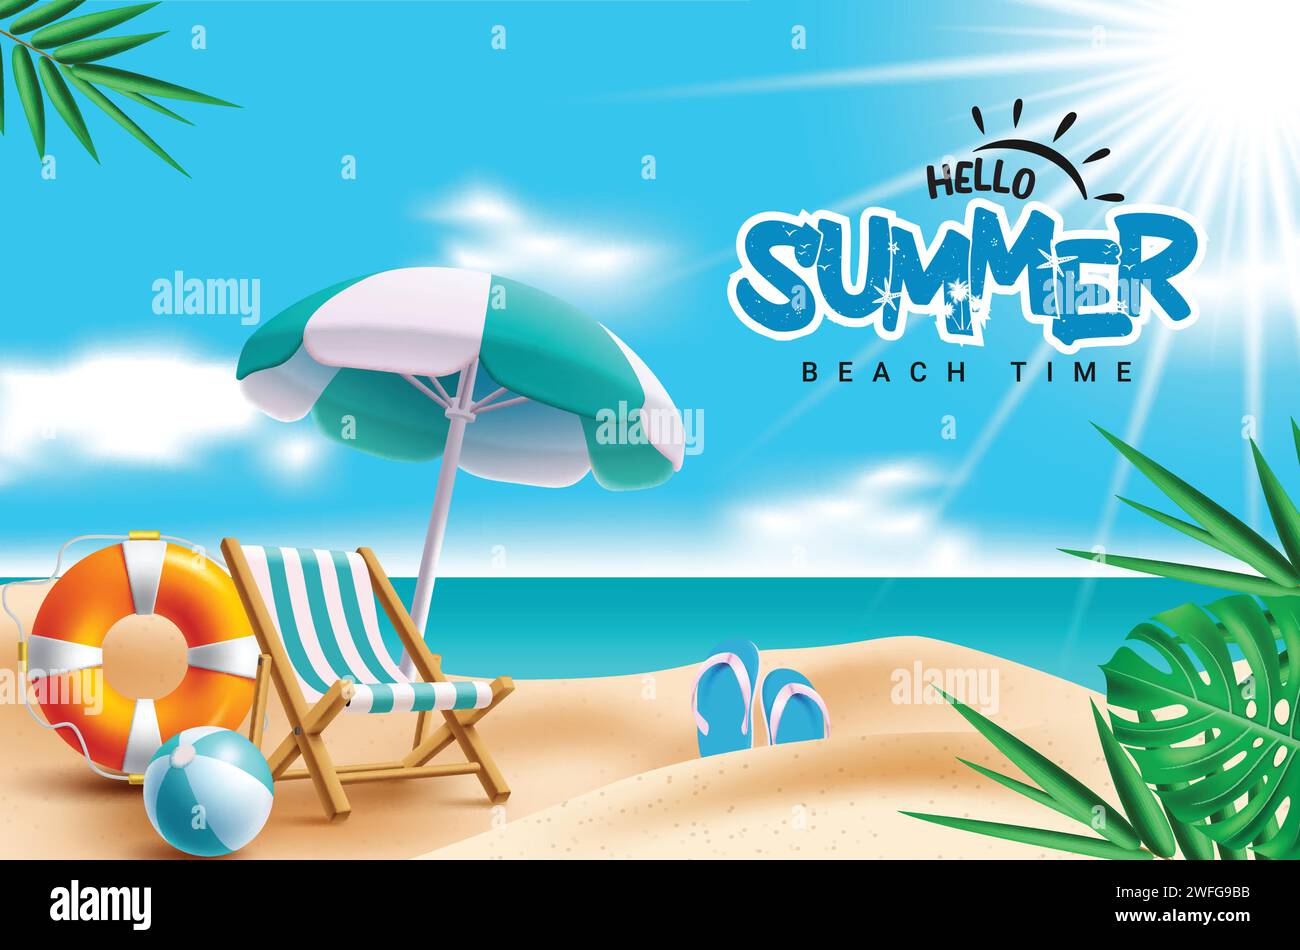 Summer hello text vector design. Hello summer greeting text beach time with chair, lifebuoy, umbrella and beachball elements in beach seaside Stock Vector